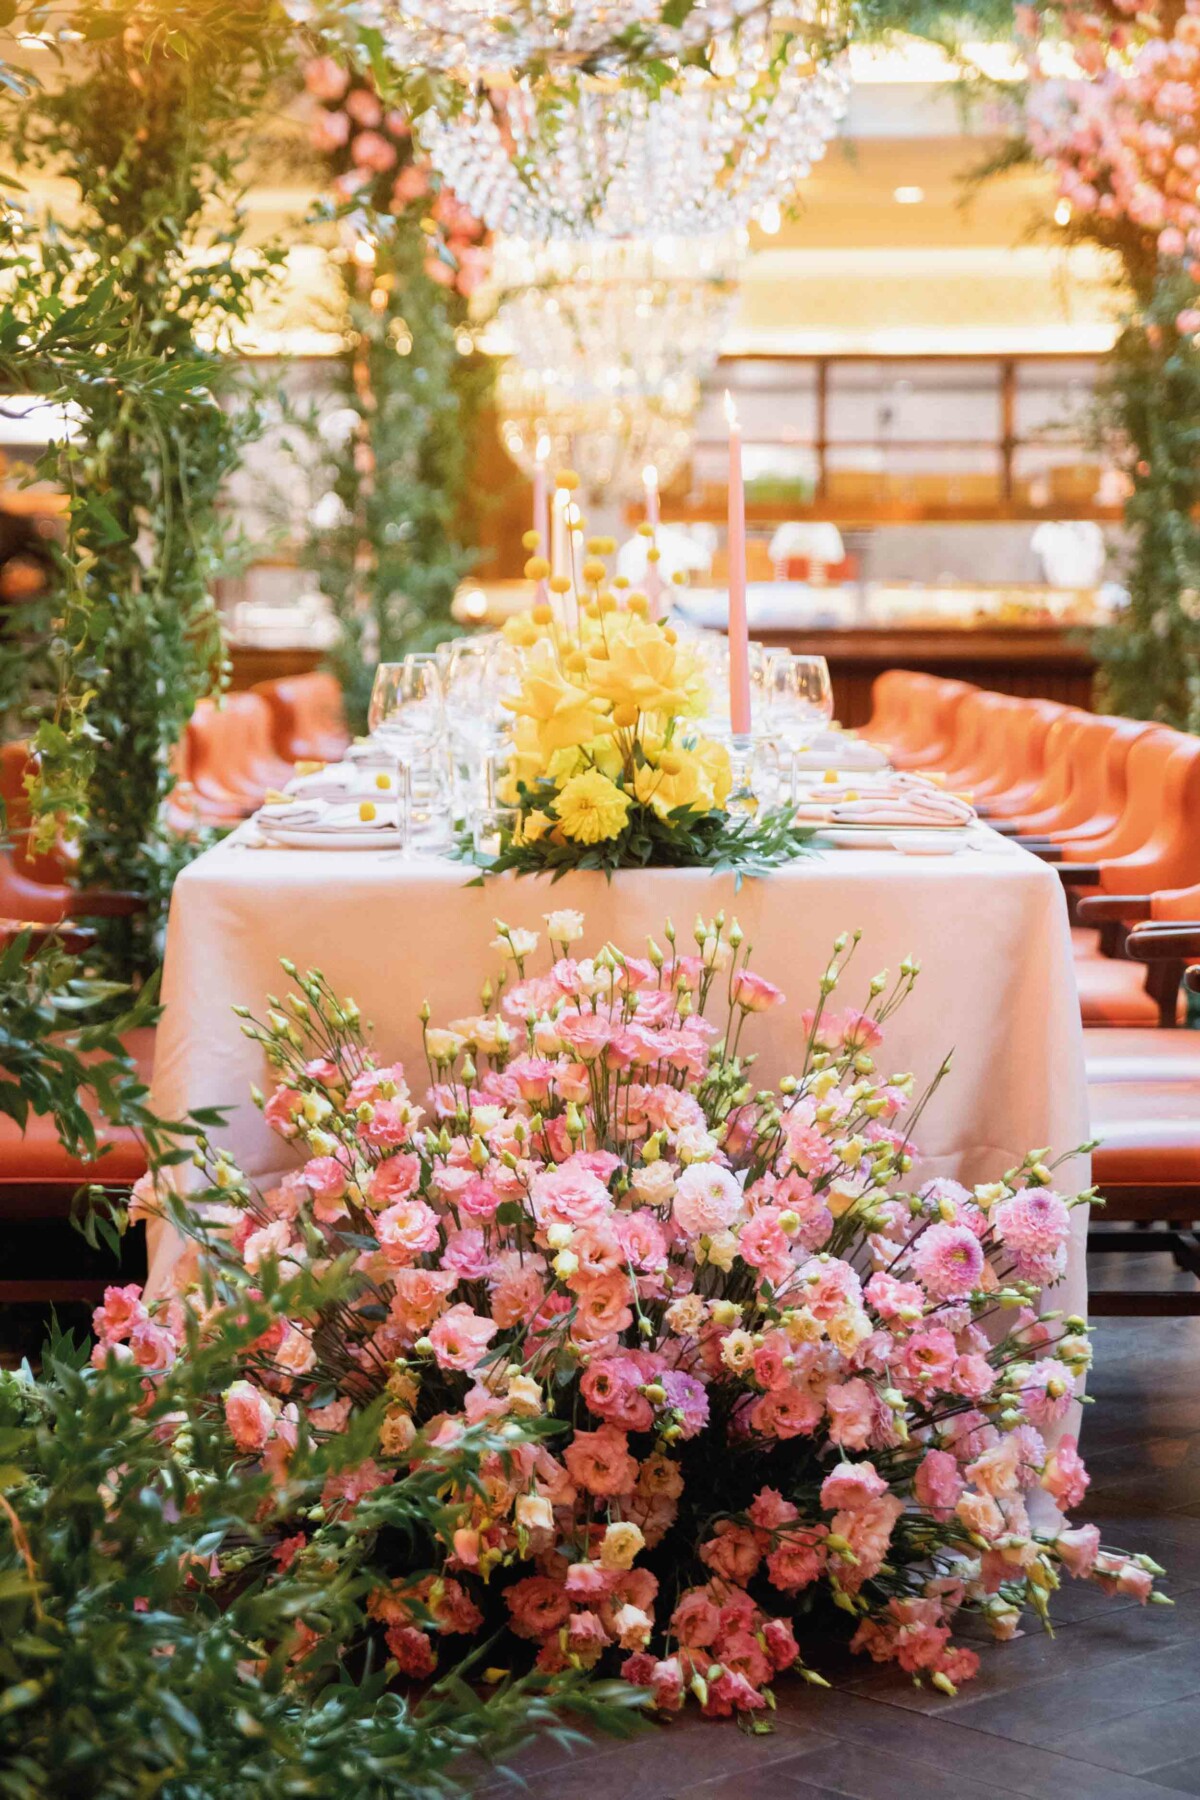 A beautiful floral arrangement on a dining table 